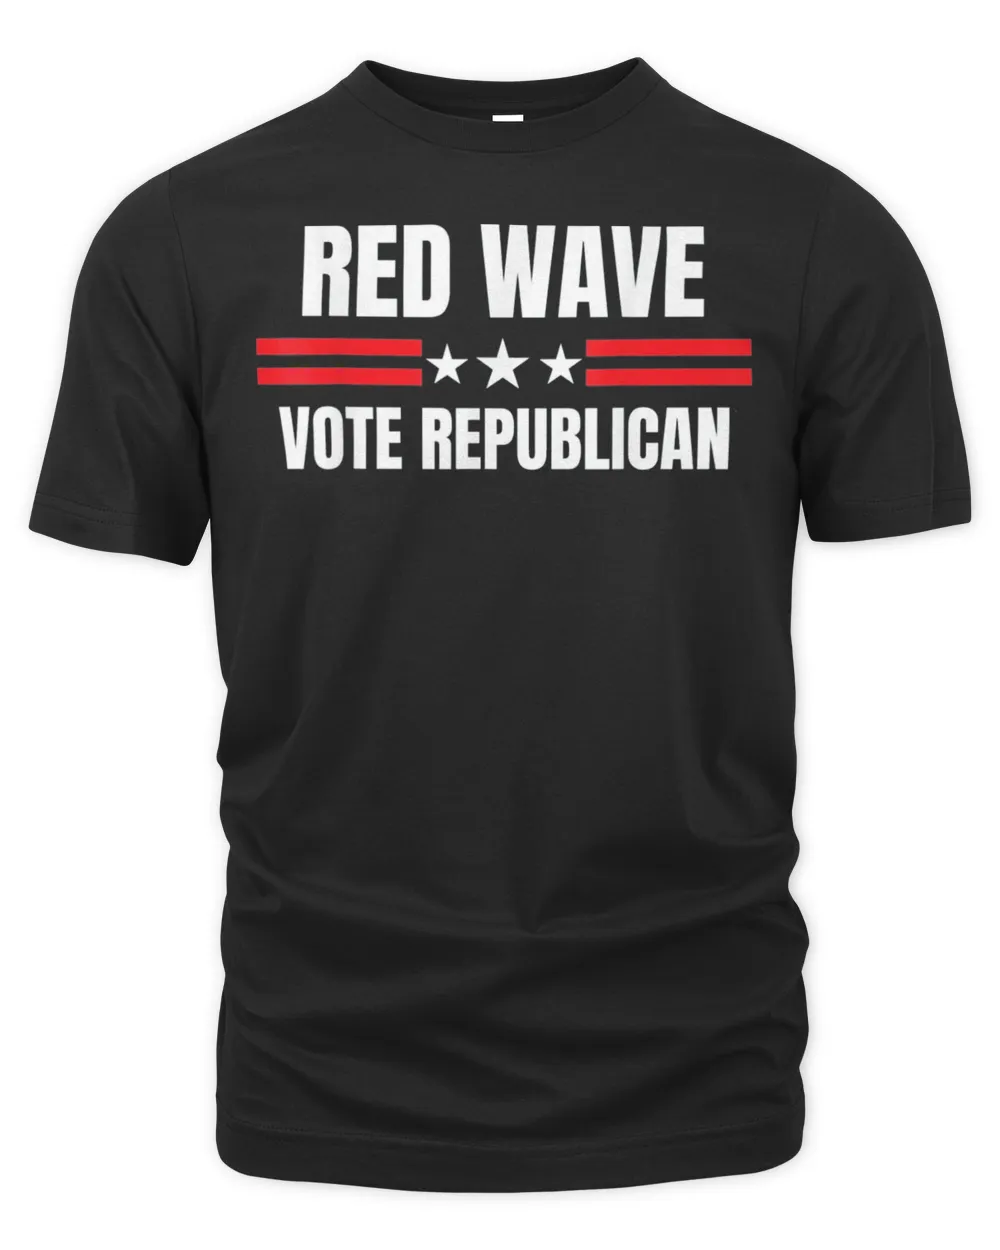 Vote Republican Red Wave Conservative Trump Supporter USA Tee Shirt